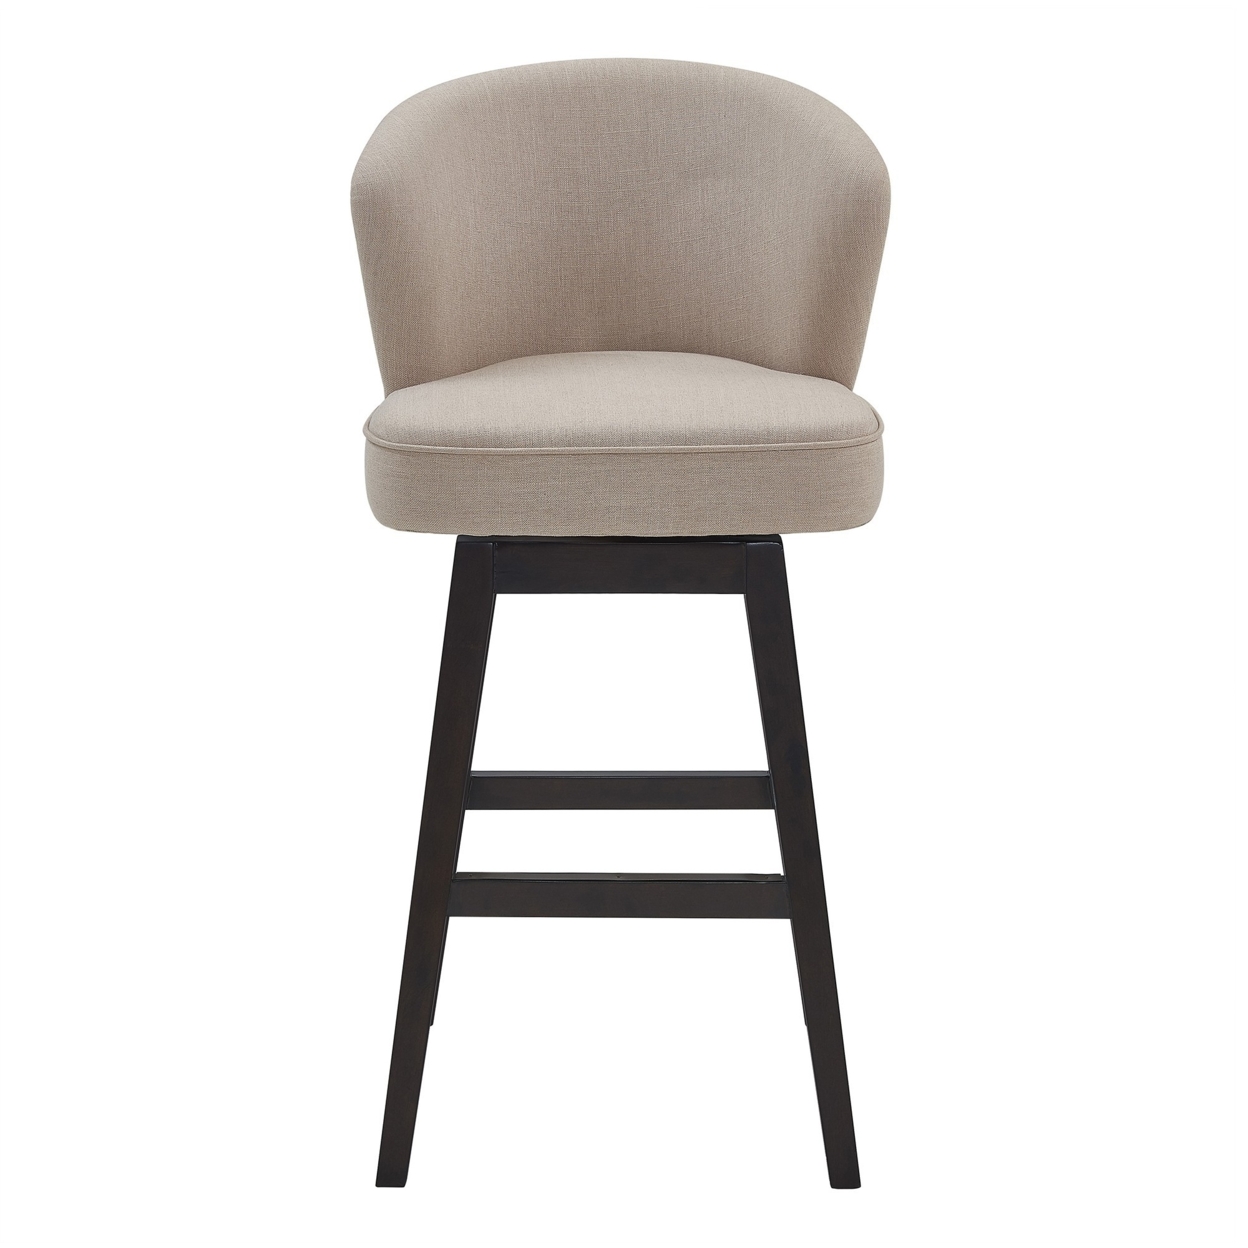 26 Inches Padded Swivel Counter Stool With Curved Backrest, Beige- Saltoro Sherpi